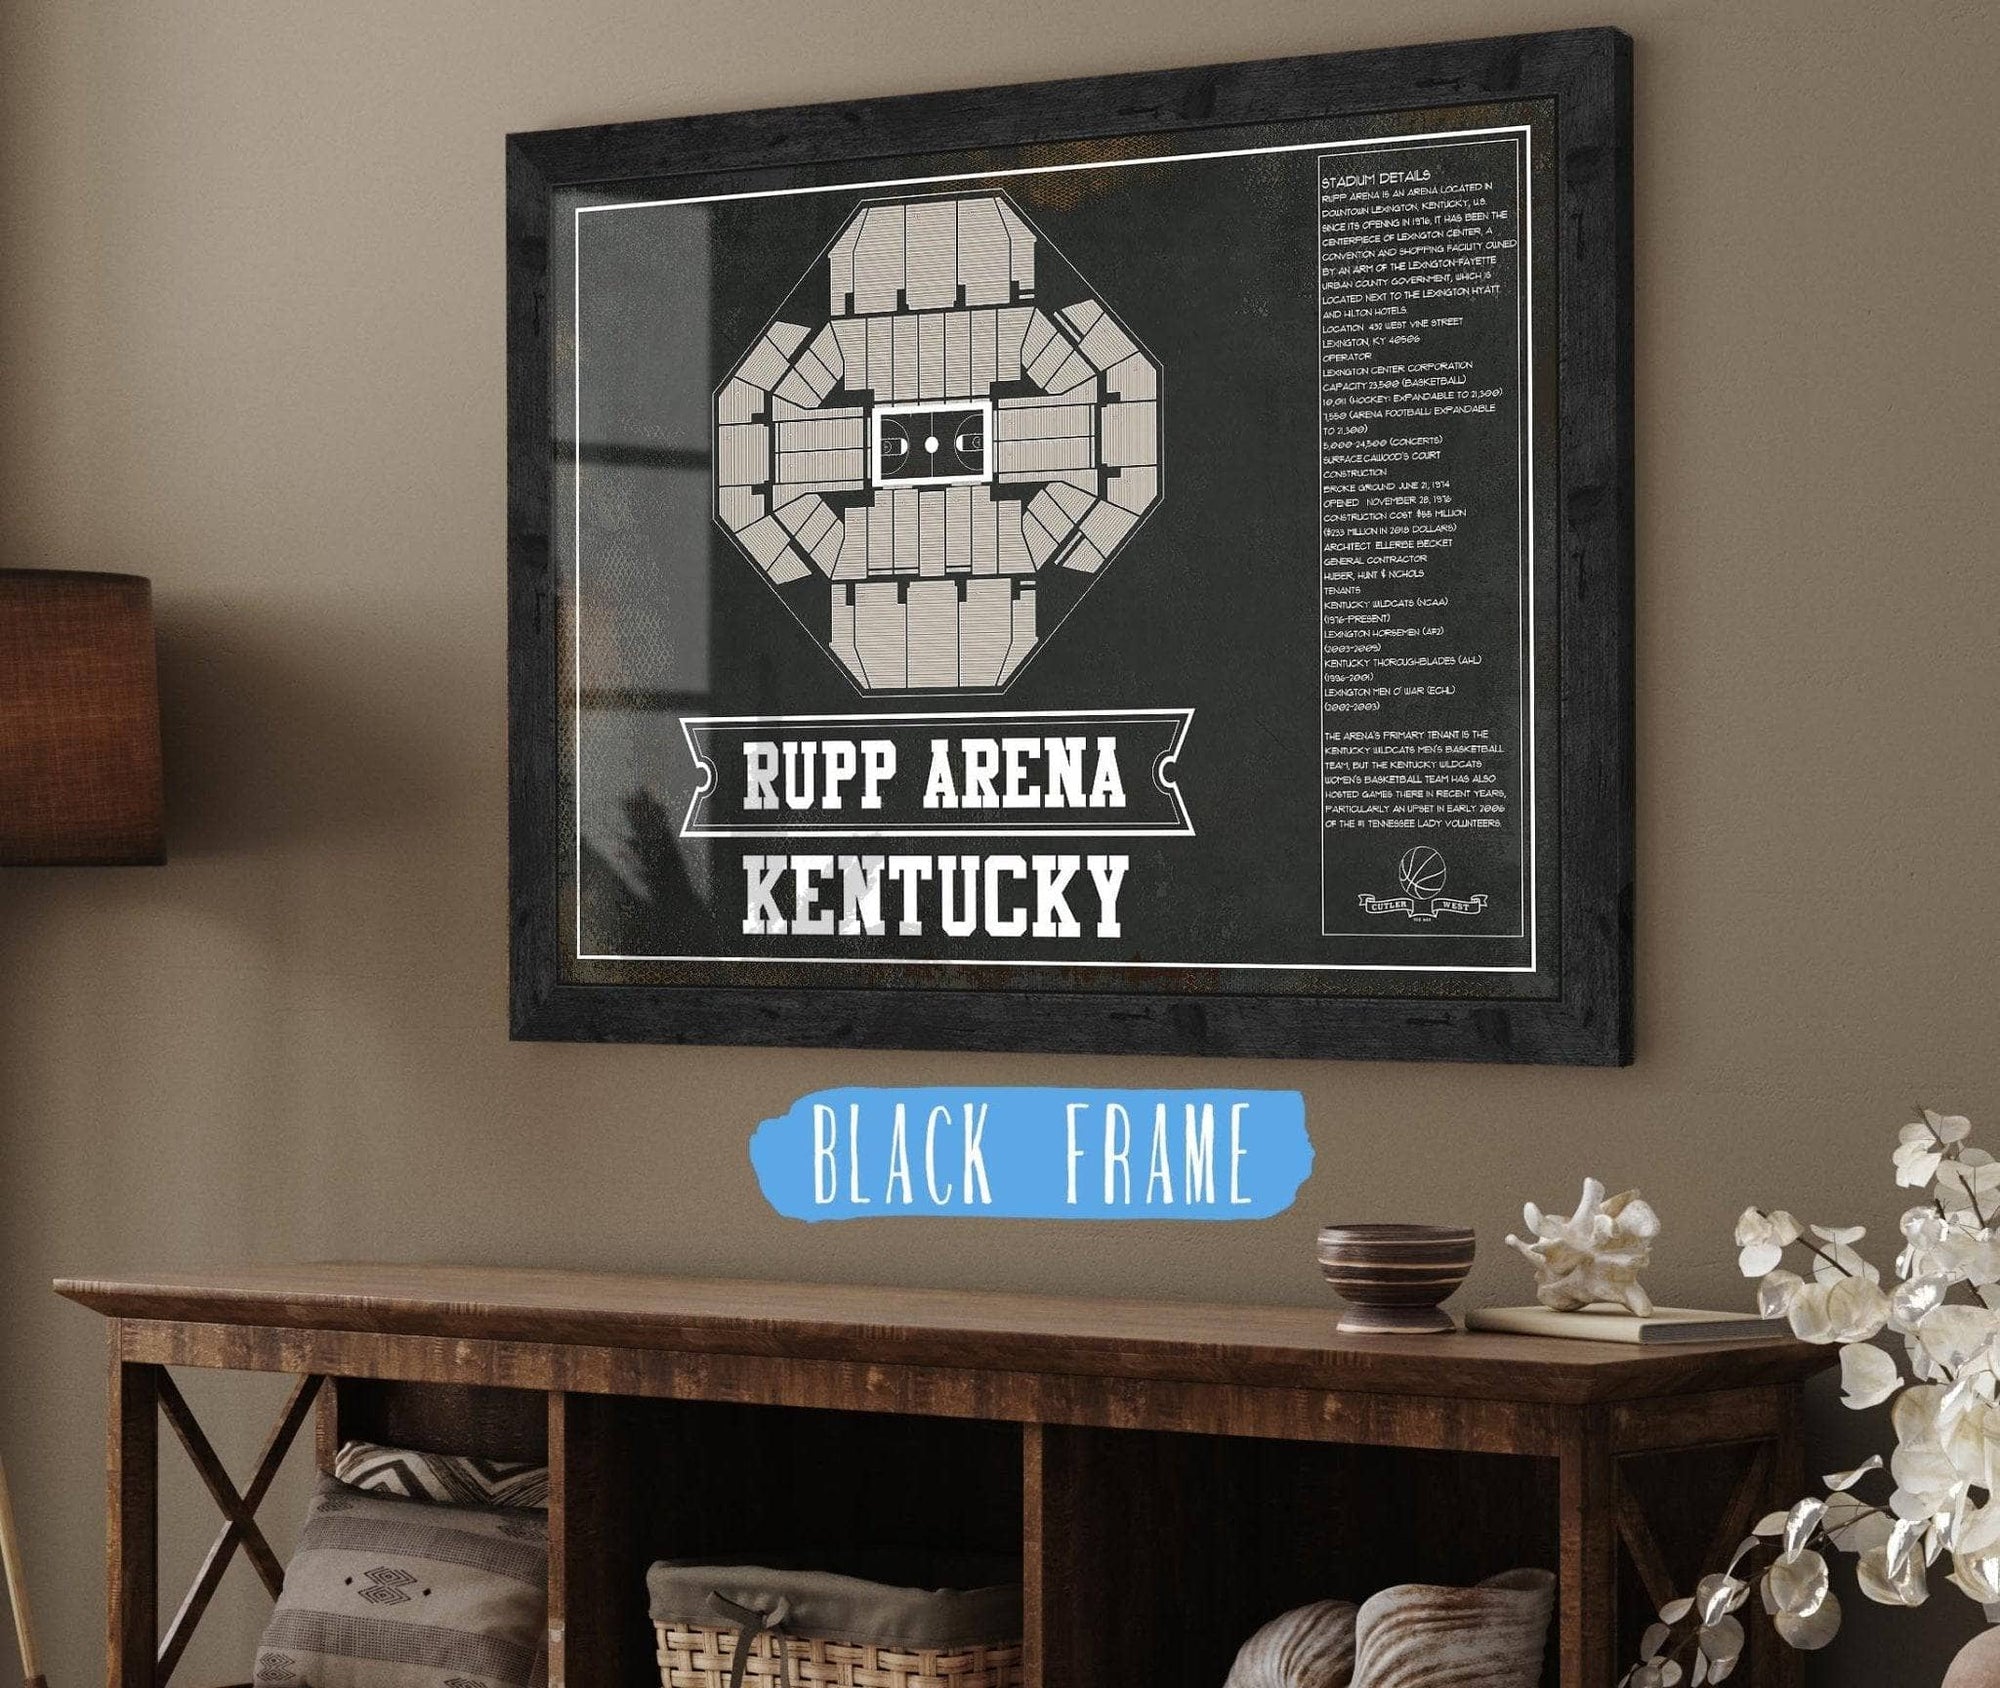 Cutler West Basketball Collection 14" x 11" / Black Frame Kentucky Wildcats Rupp Arena Black And White 235353085